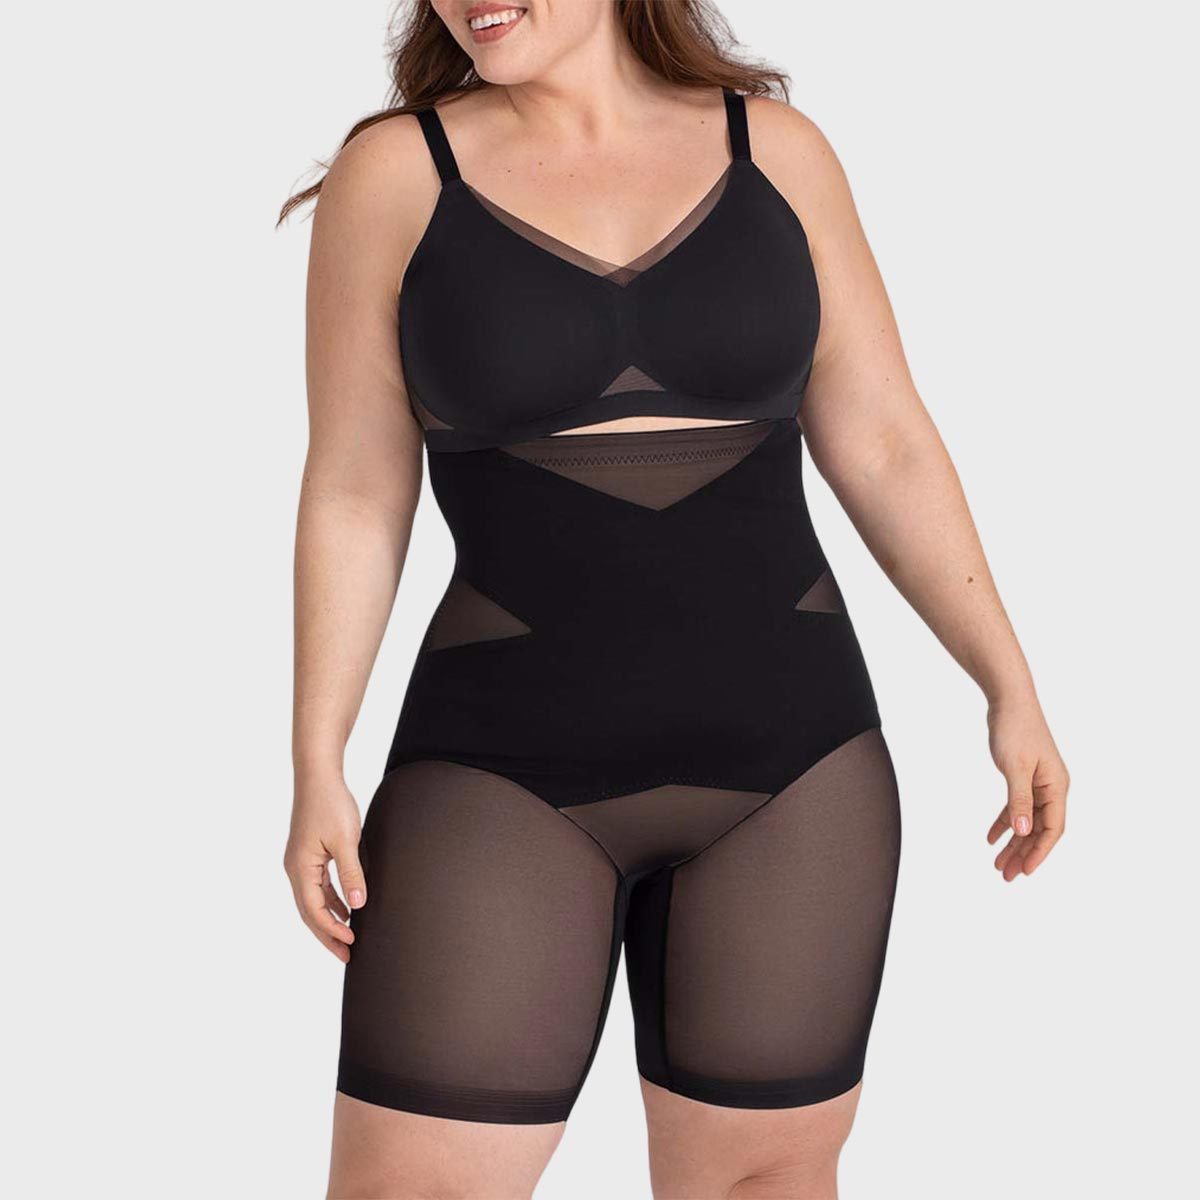 ForeverDermawear You can wear shapewear to work everyday as long